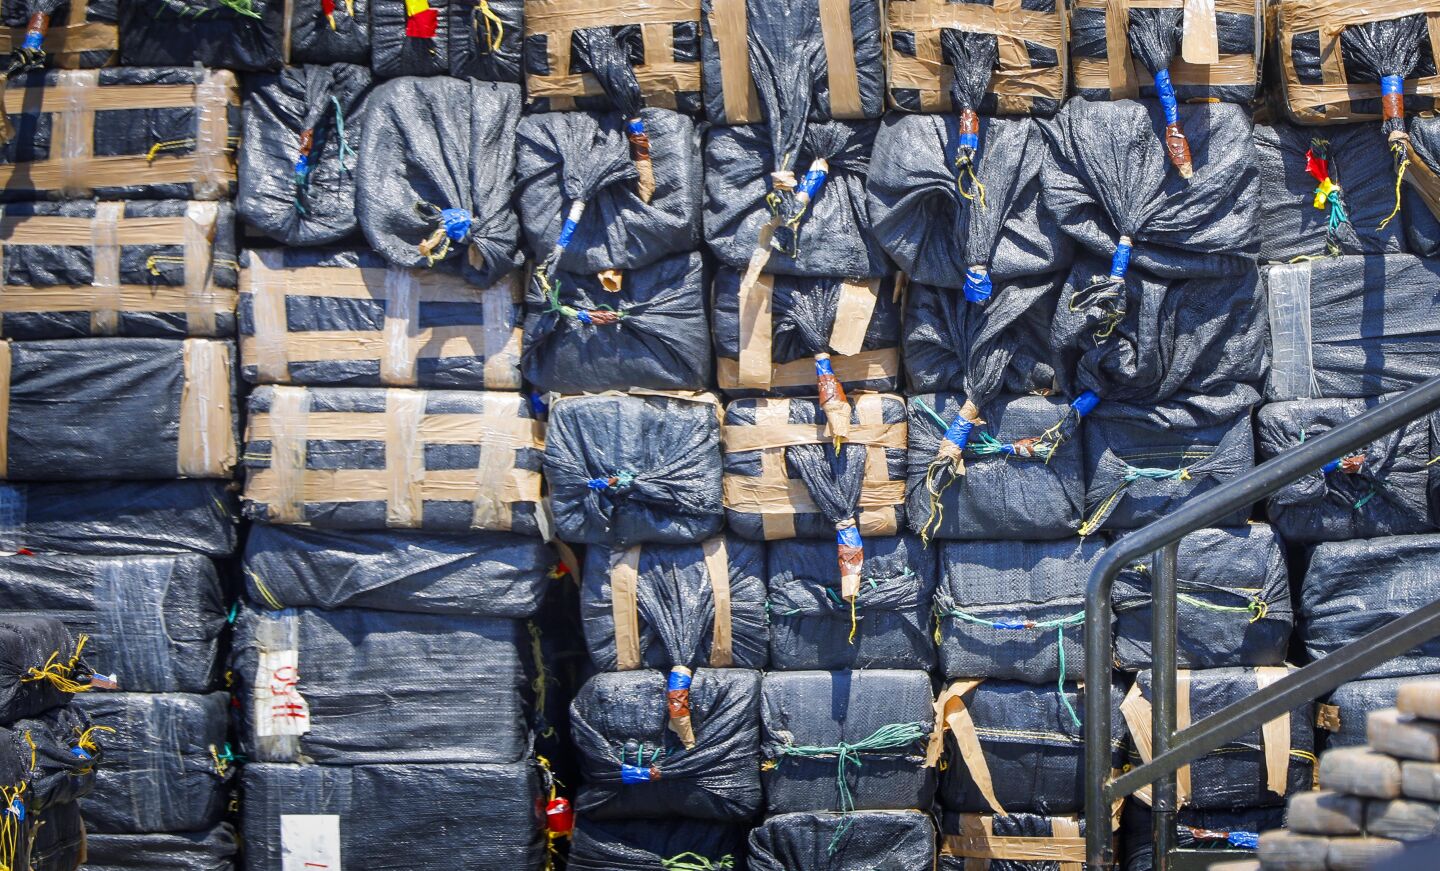 Some of the nearly 39,000 pounds of cocaine and almost 1,000 pounds of marijuana seized in the Eastern Pacific Ocean in the last few months by the Coast Guard was on display during the visit of Vice President Mike Pence aboard the Coast Guard cutter, Munro, July 11, 2019, at Naval Air Station North Island in Coronado, California. The Munro, homeported in Alameda, in Northern California, is tasked with seizing drugs in international waters.